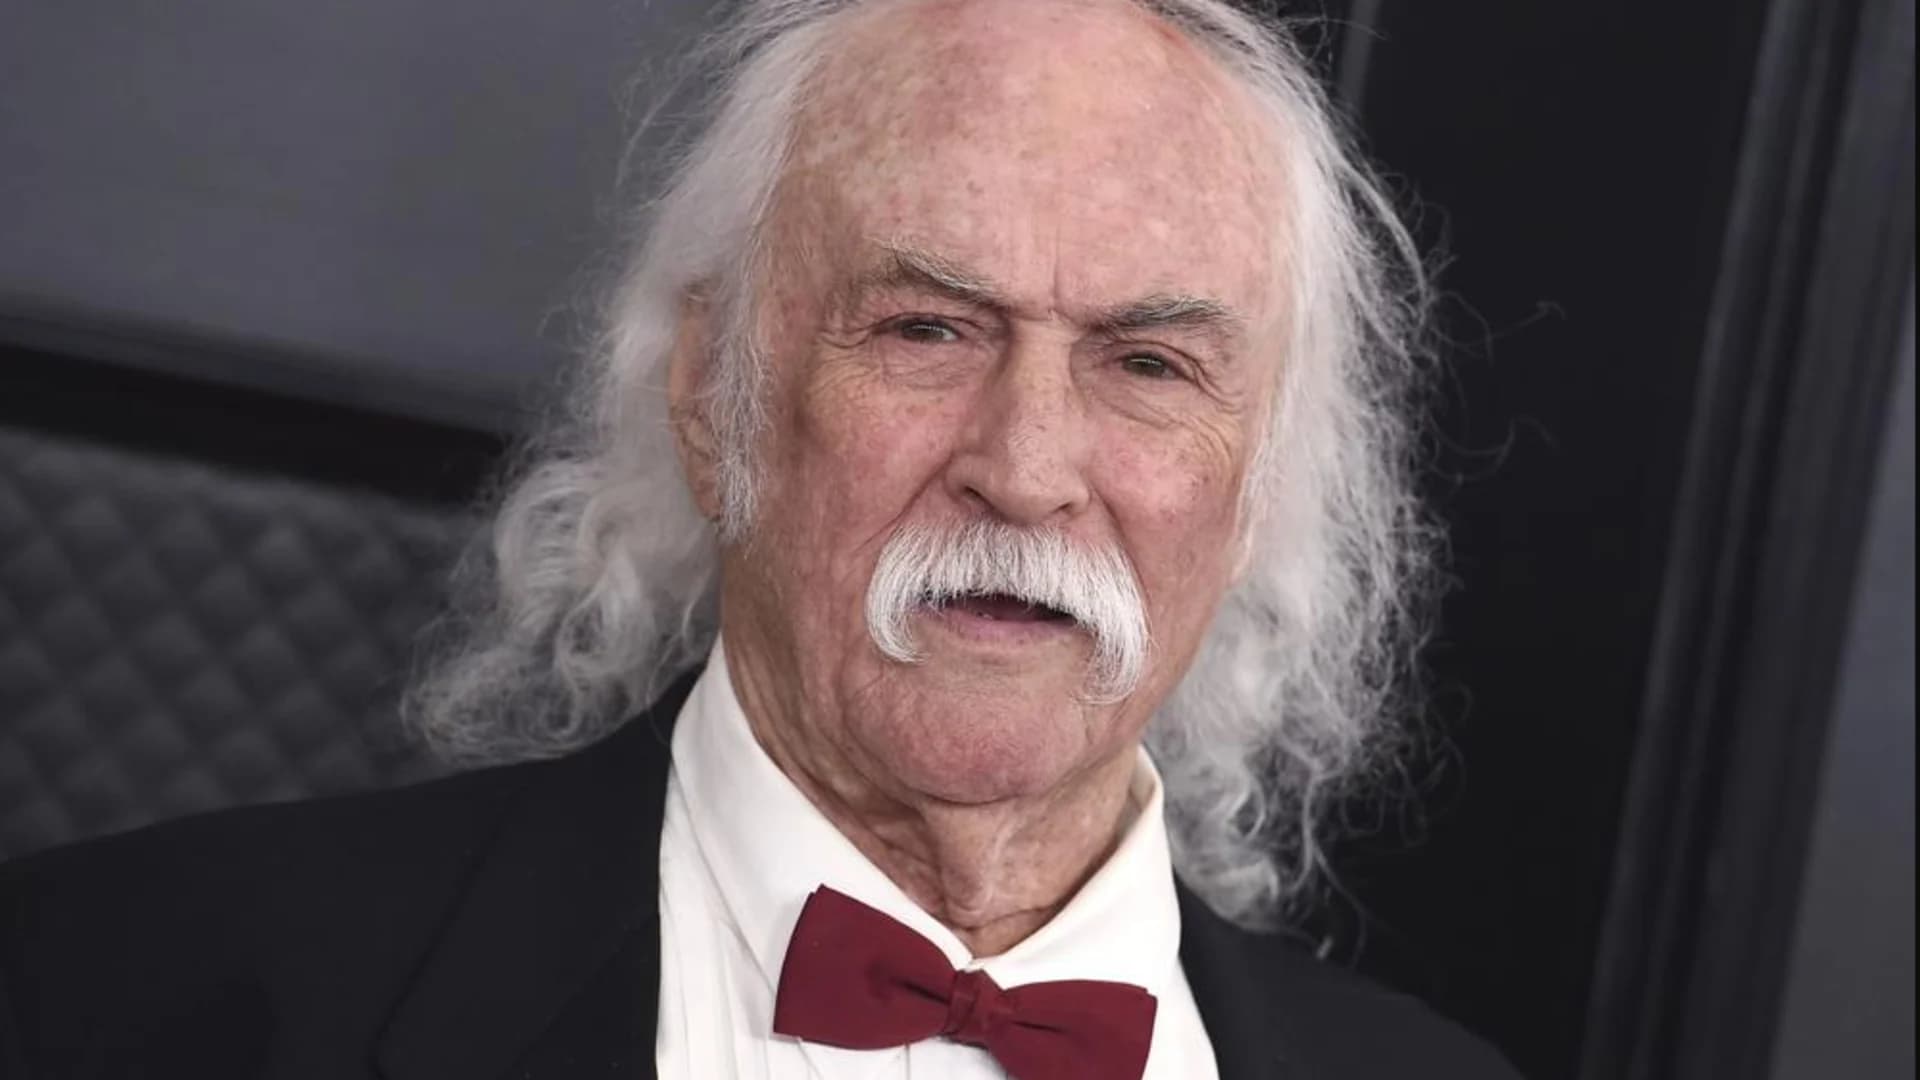 David Crosby, rock musician and CSNY co-founder, dies at 81